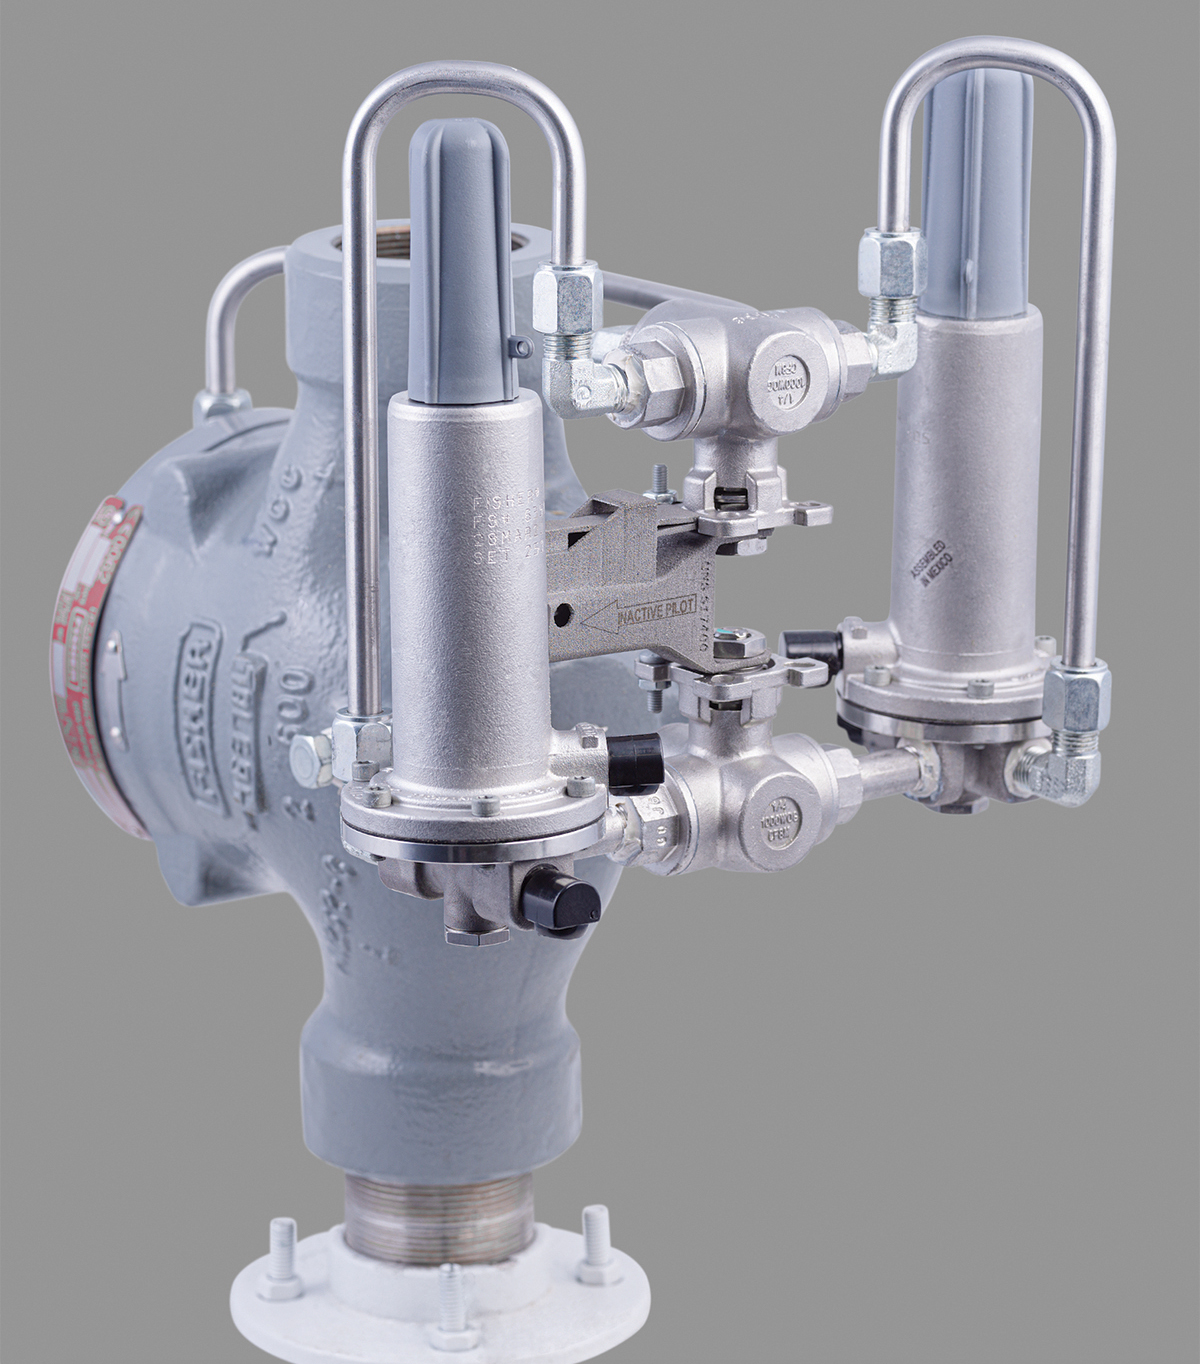 Fisher 63EGLP-16 pilot-operated relief valve, designed for safety in pressurized bullet tanks storing liquid propane and anhydrous ammonia.